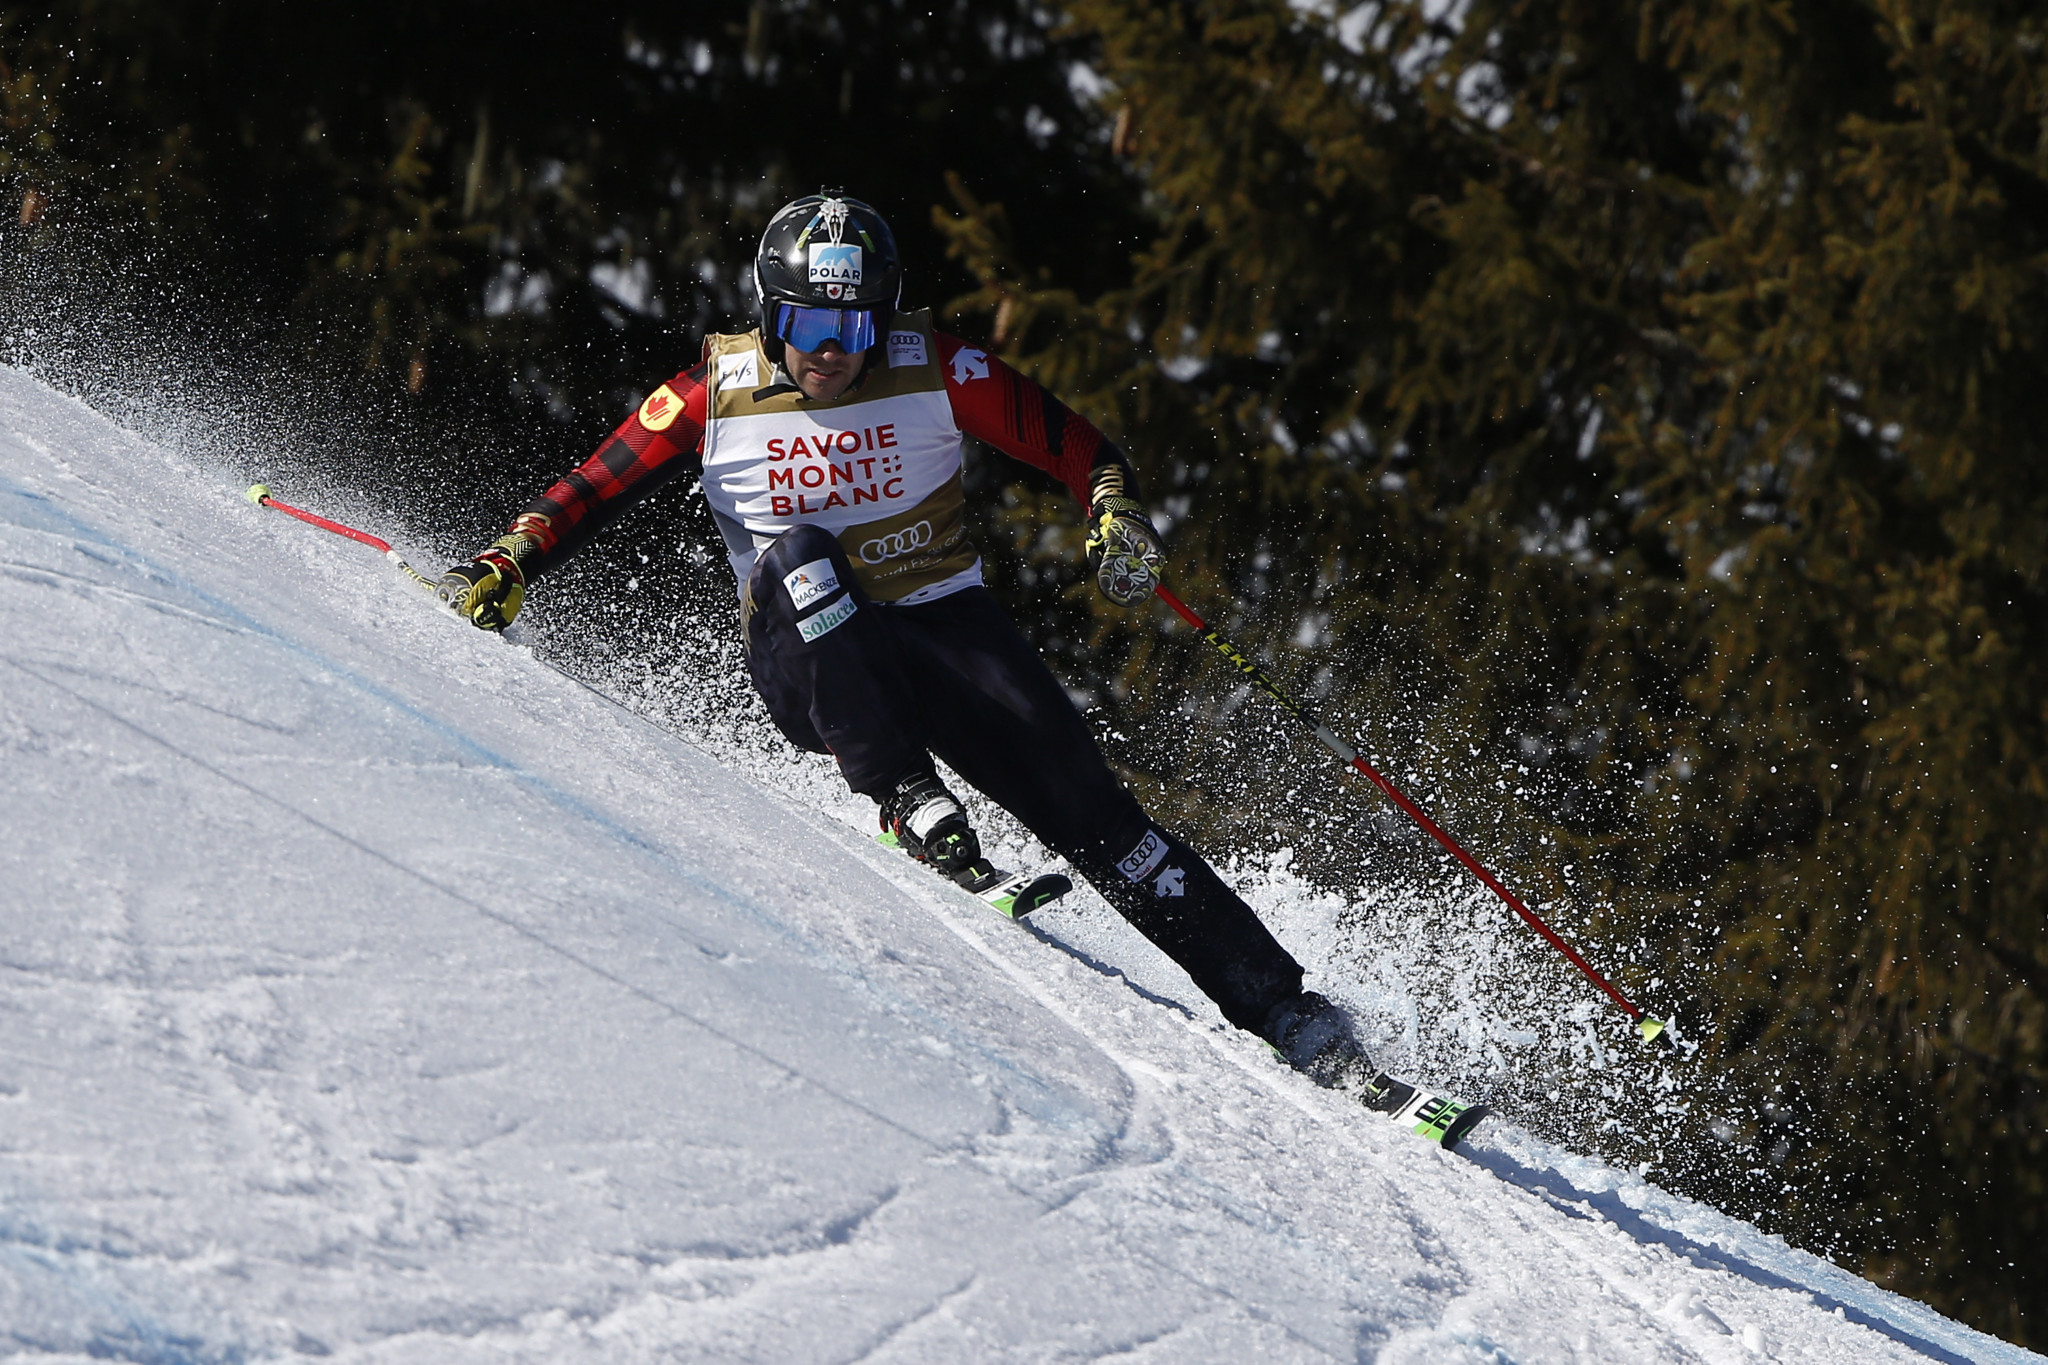 Kevin Drury has already won the men's World Cup ski cross title ©Getty Images